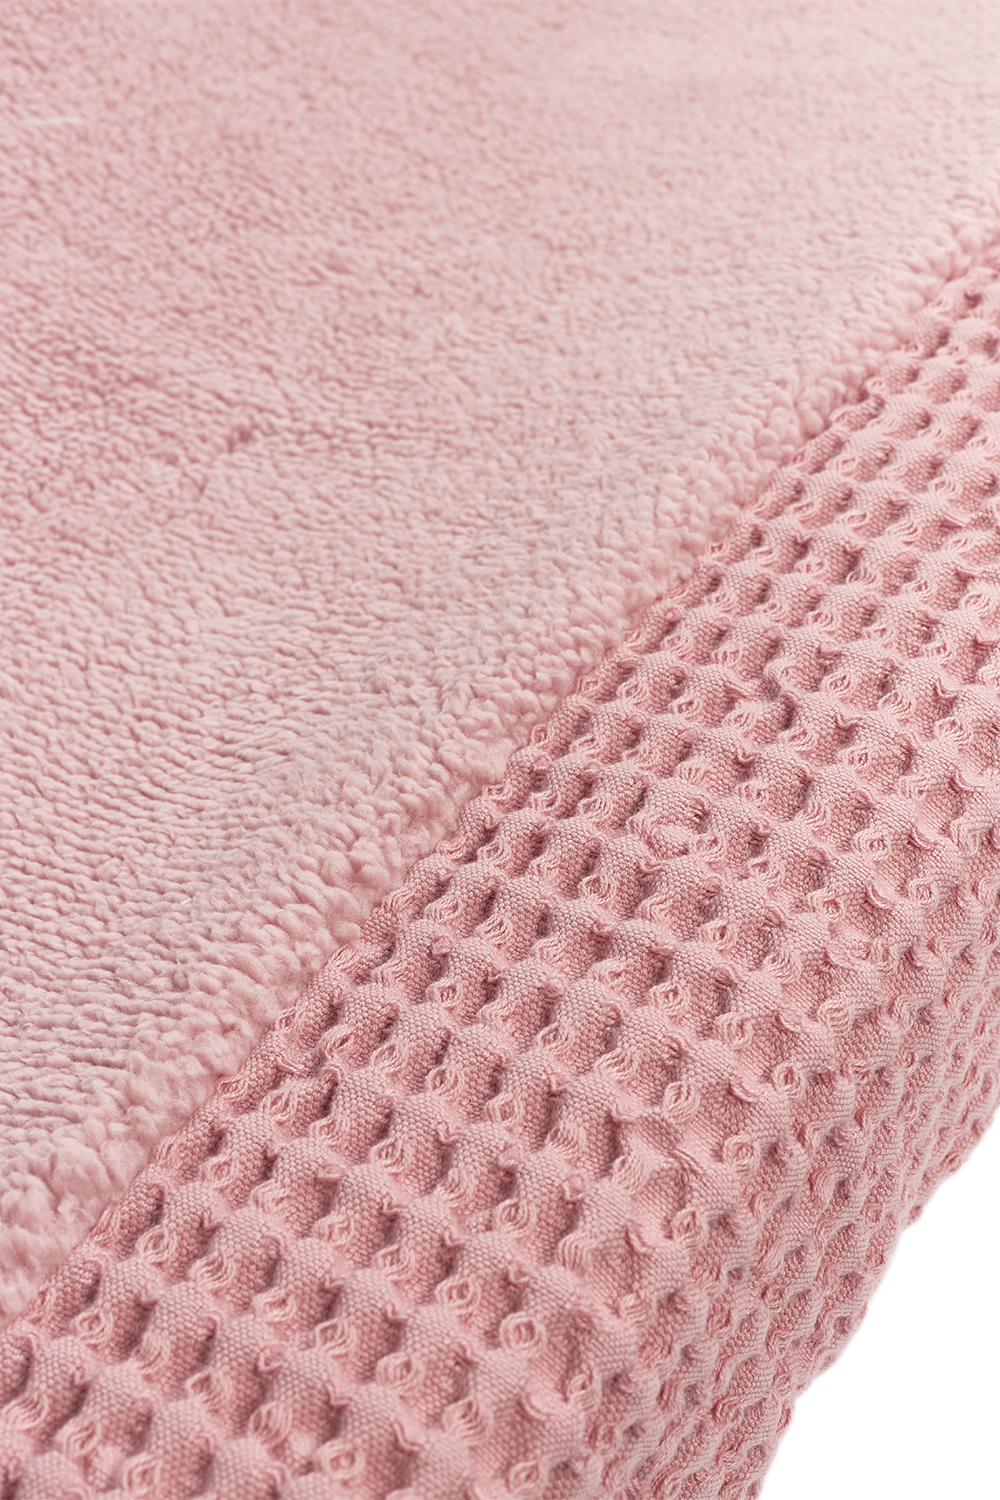 Changing mat cover Waffle Teddy - old pink - 50x70cm